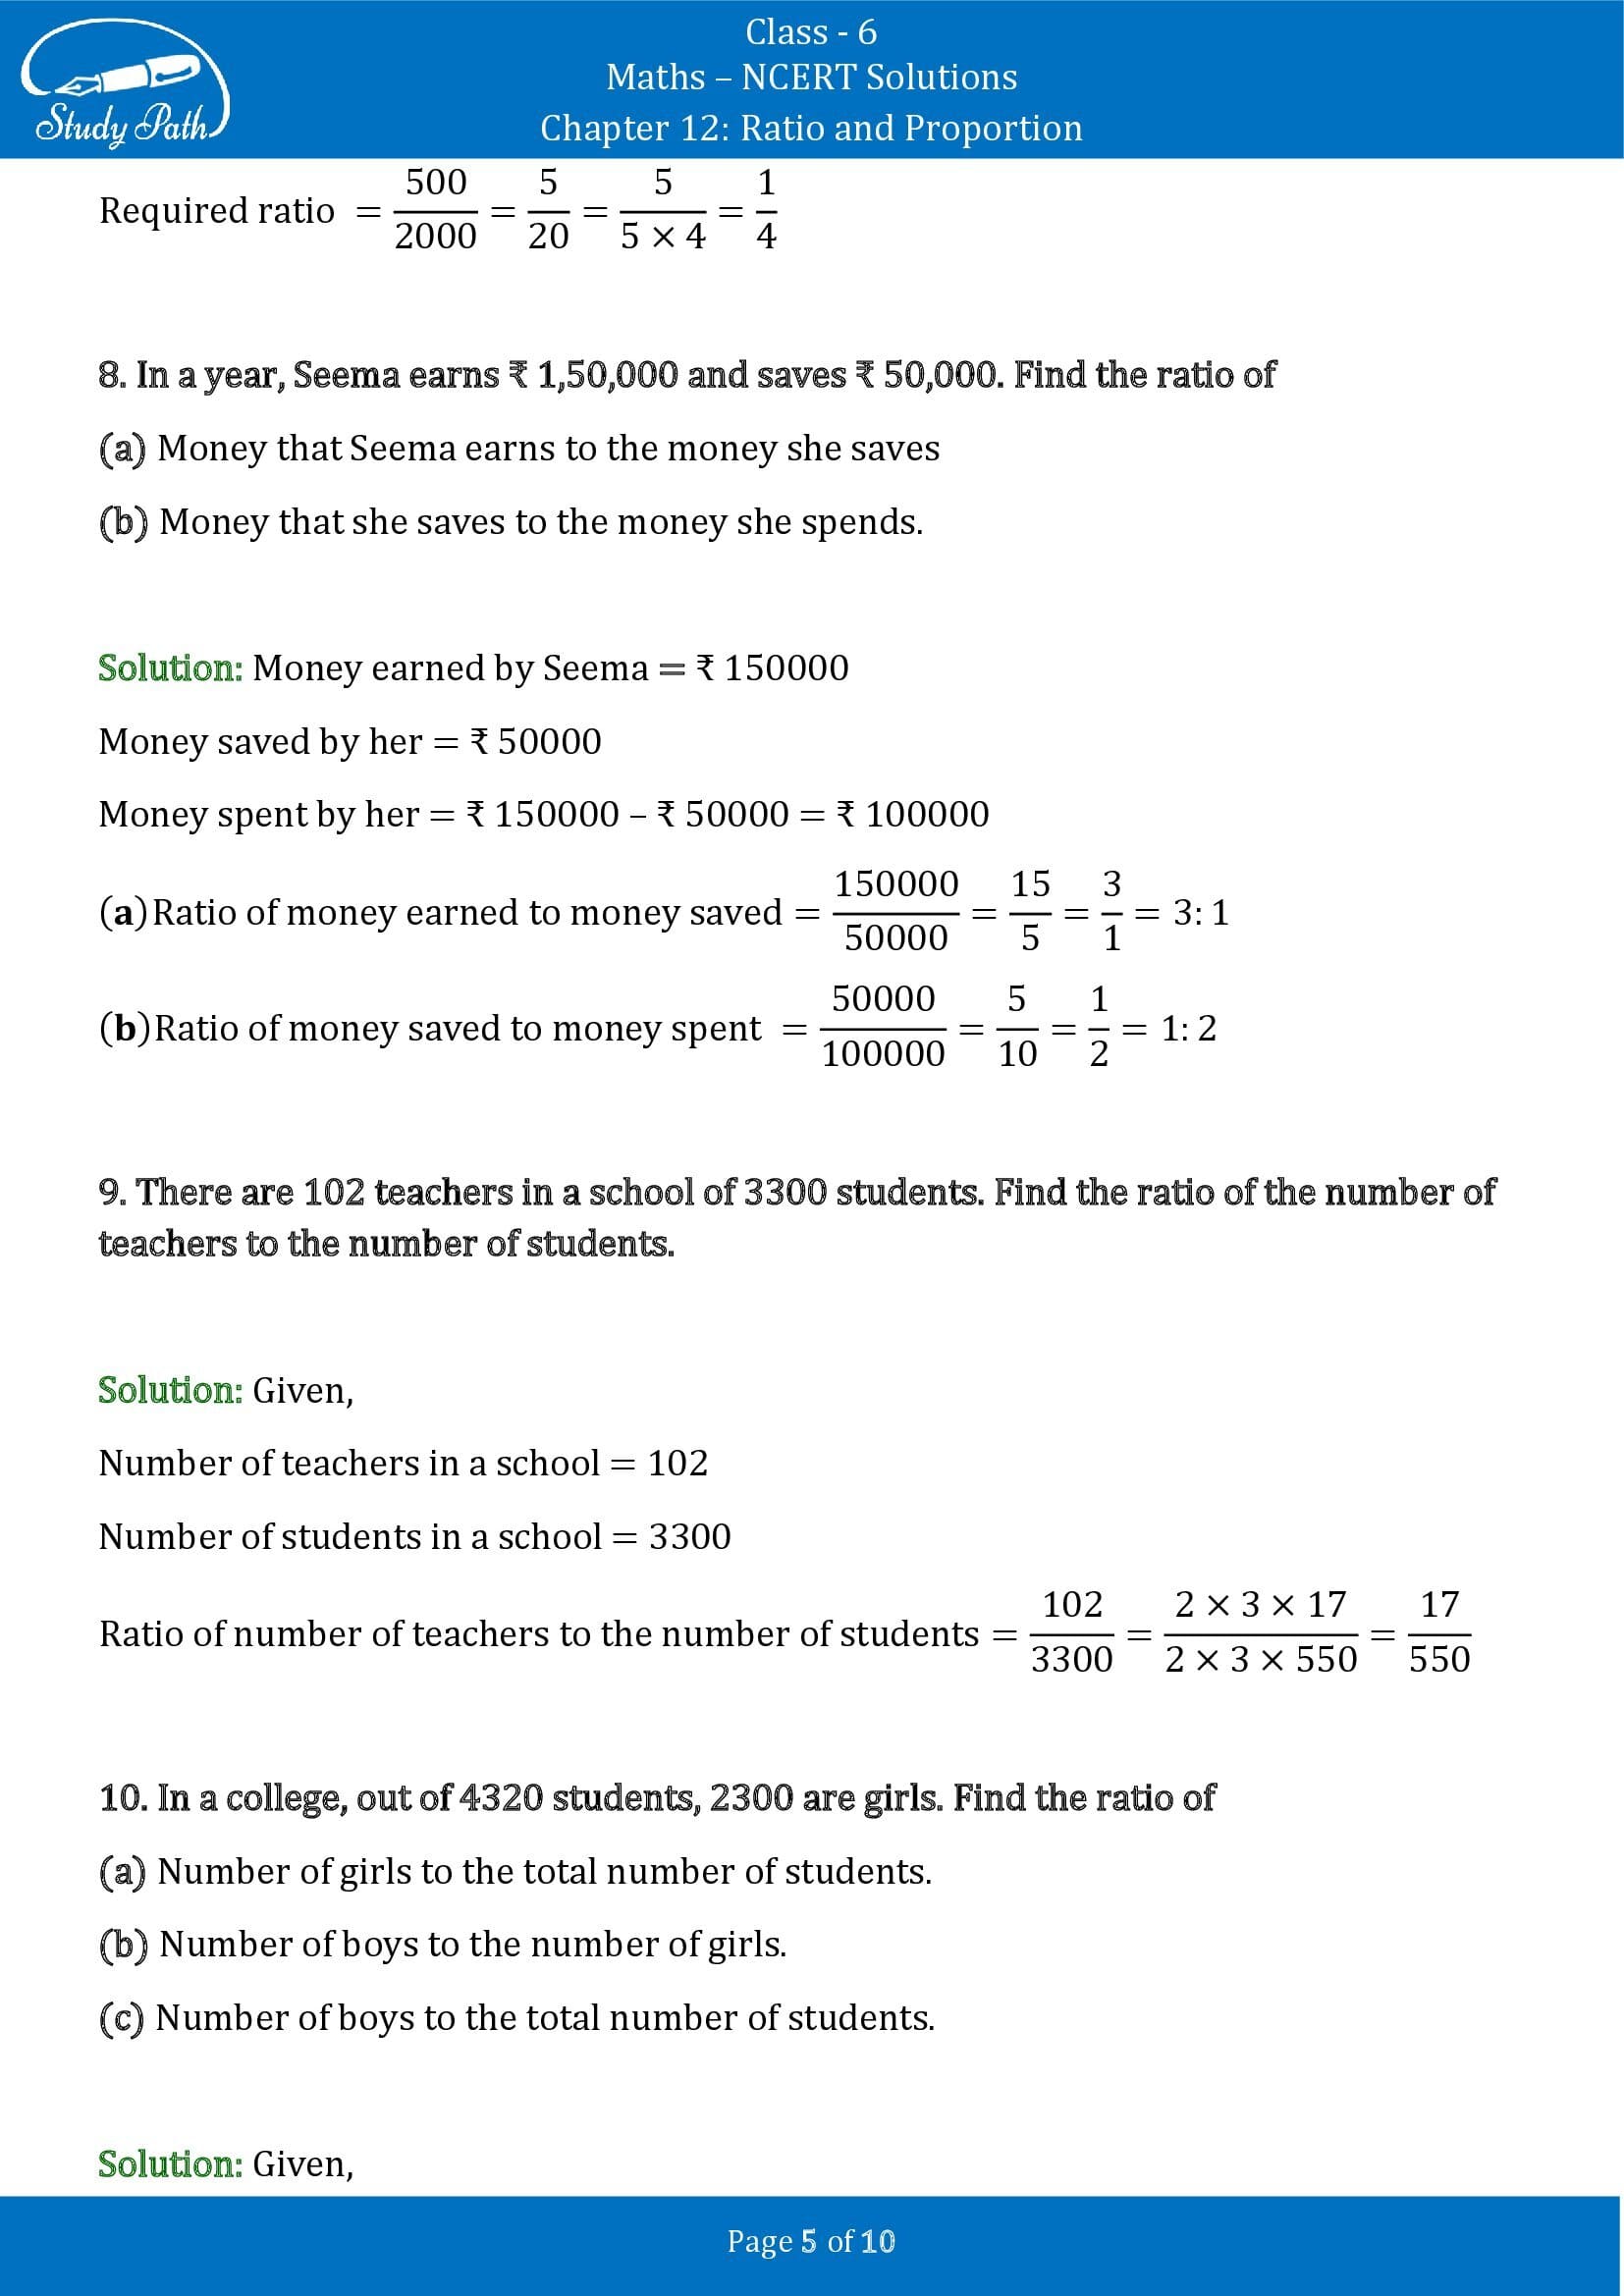 NCERT Solutions for Class 6 Maths Chapter 12 Ratio and Proportion Exercise 12.1 00005